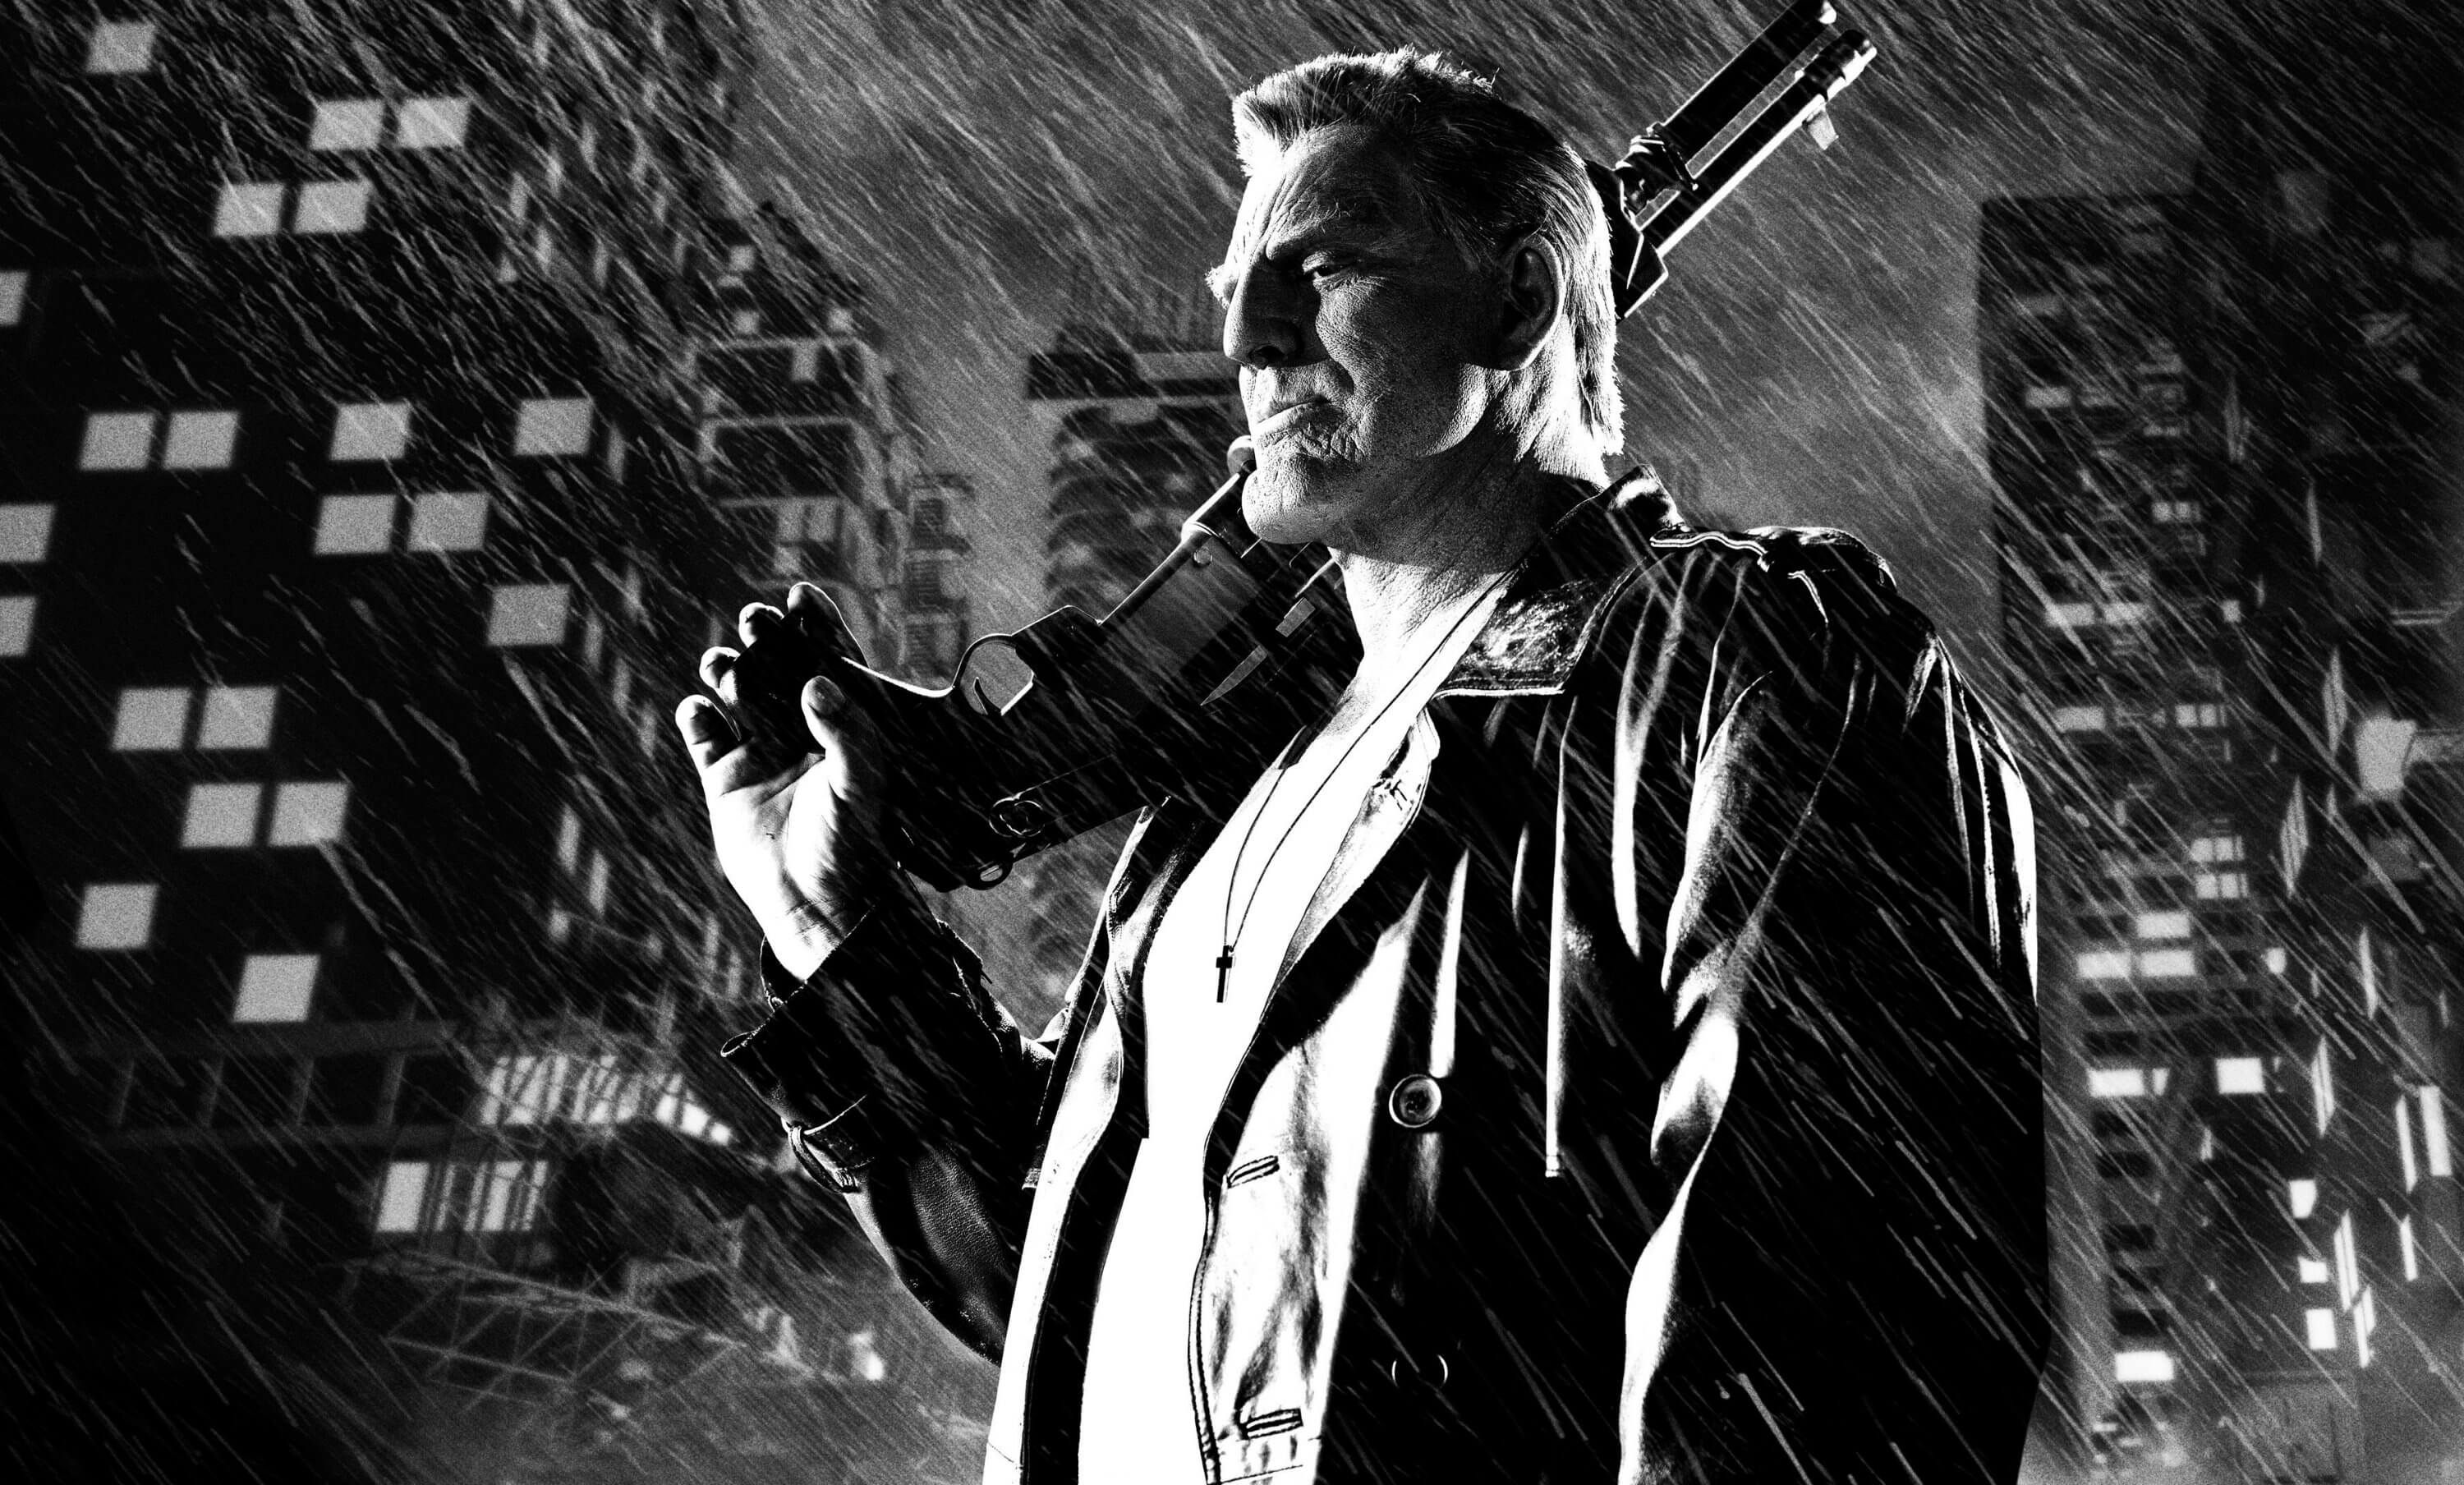 Sin City star Mickey Rourke confirmed for Hunt Club action thriller